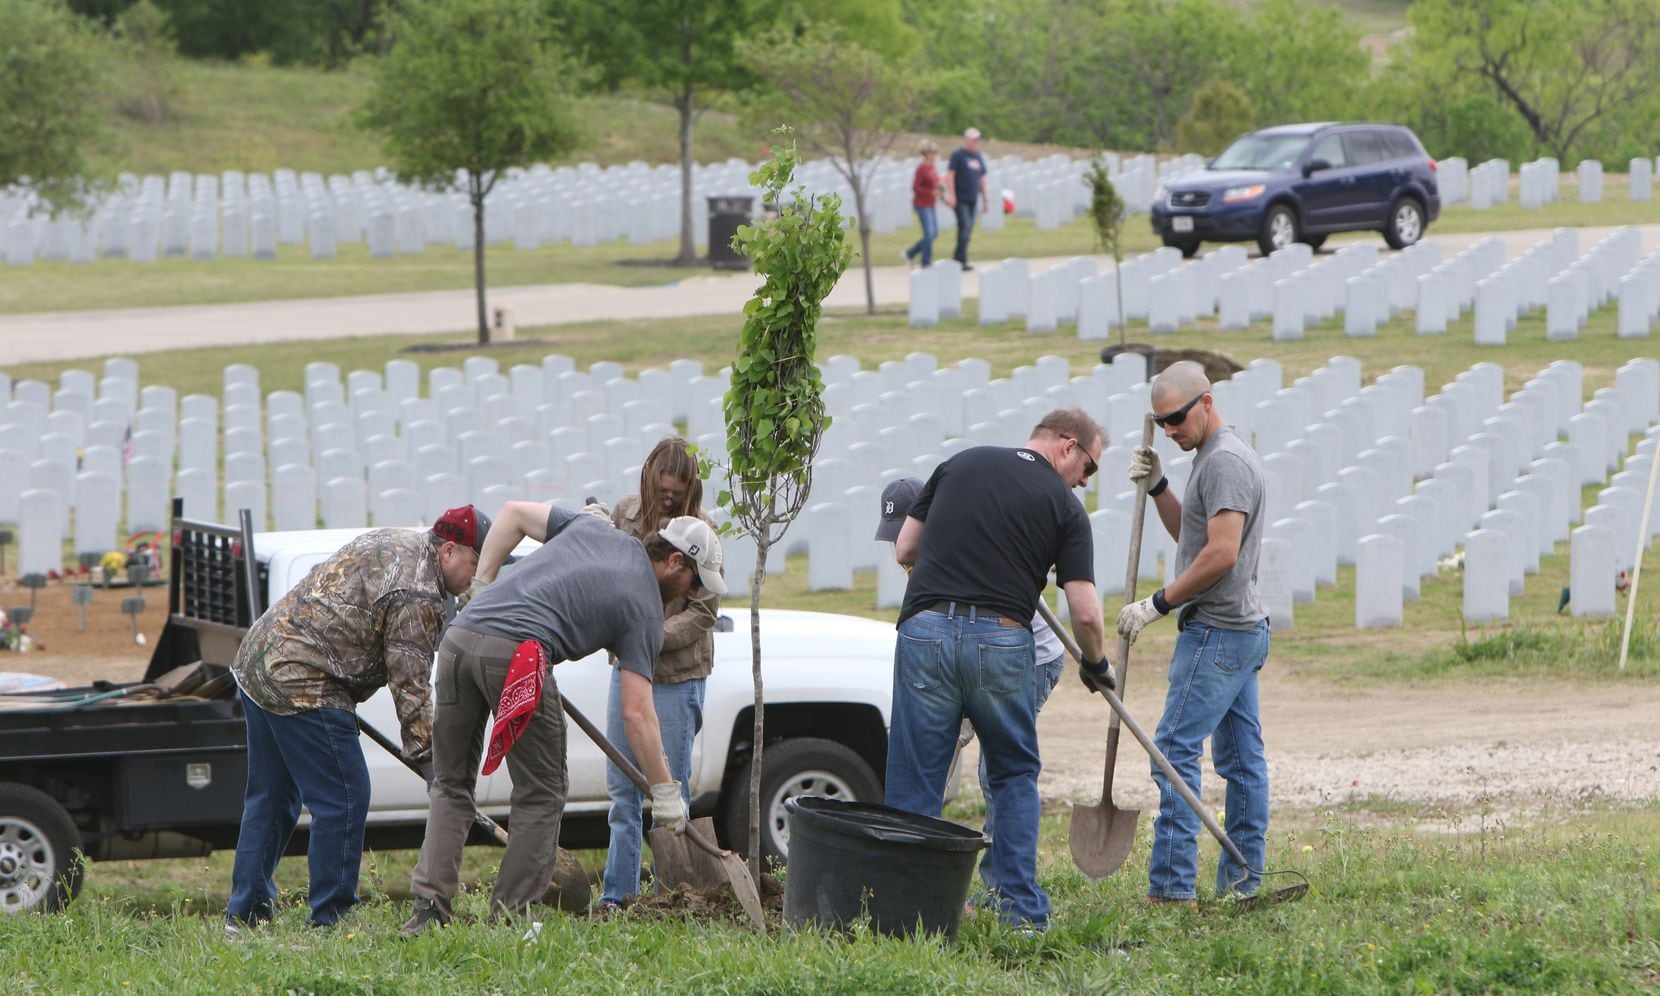 Volunteers work to plant a tree as part of a community growth program, which attracted...